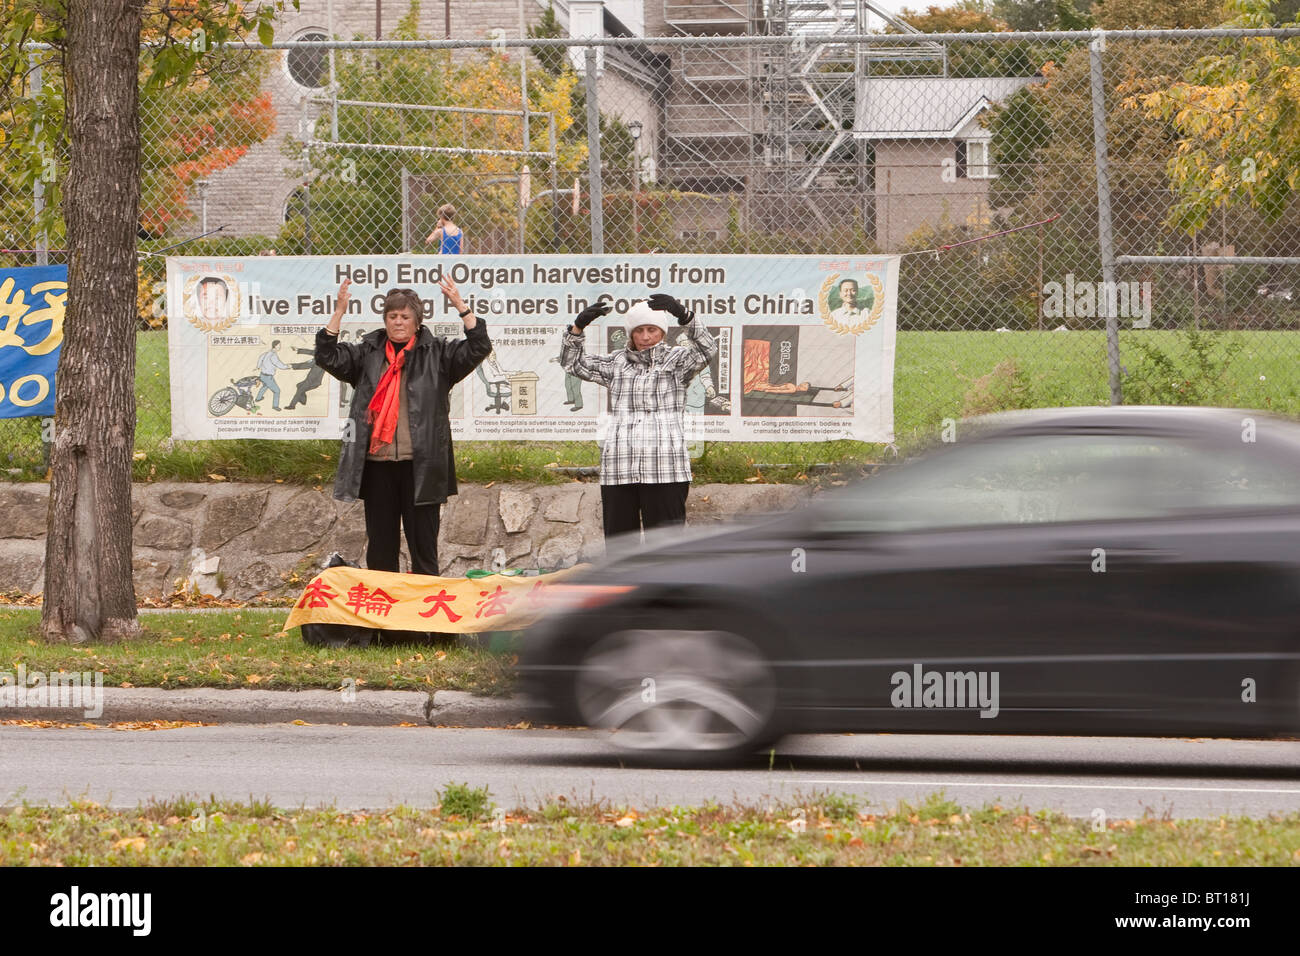 Falun Gong members practice an exercise by a major Ottawa artery in front of a protest sign Stock Photo